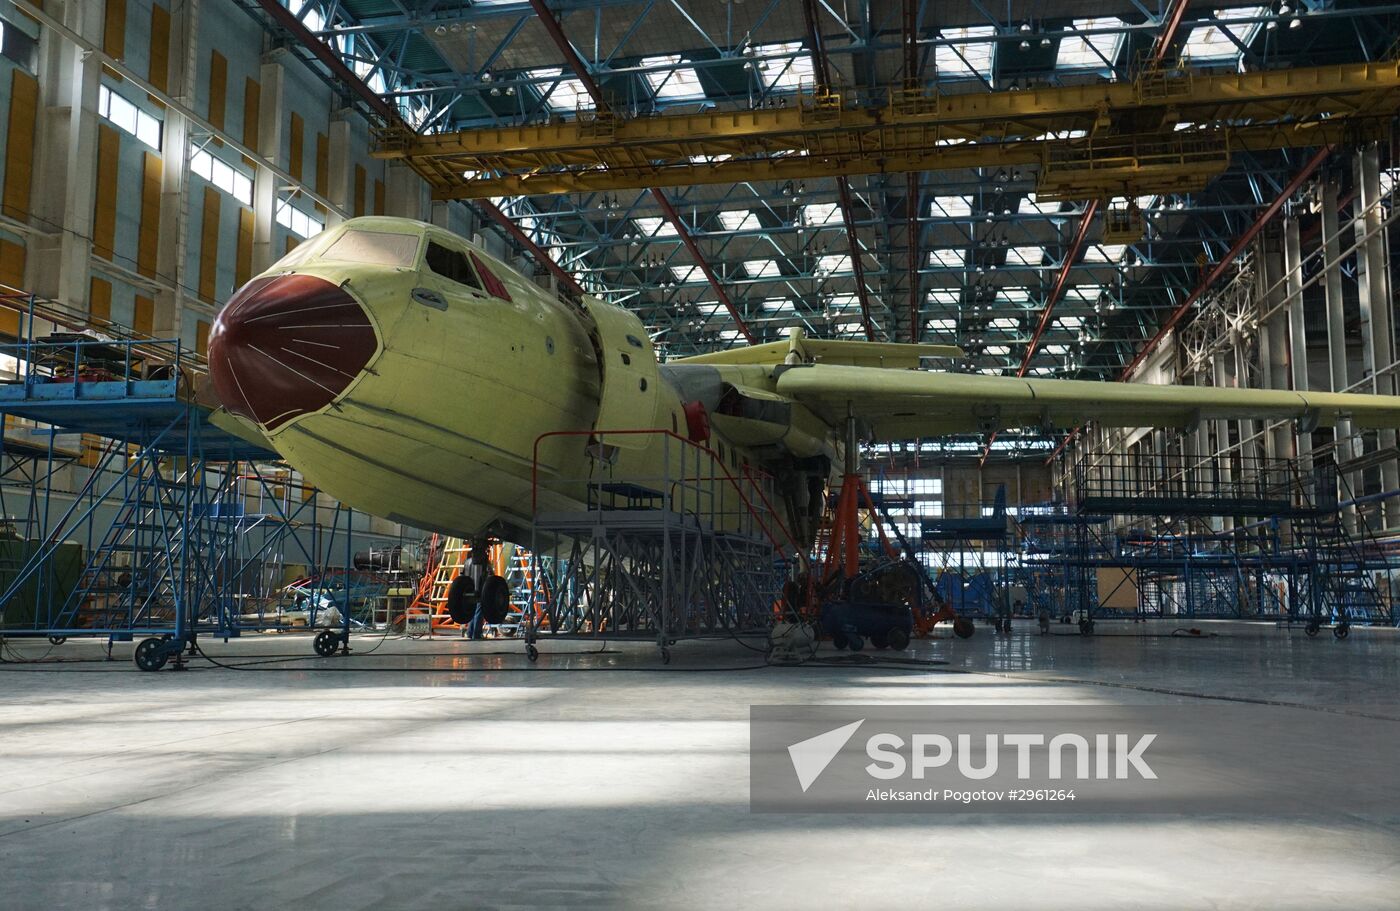 Doors Open Day at Taganrog Beriev Aircraft Scientific and Technical Complex (TANTK)